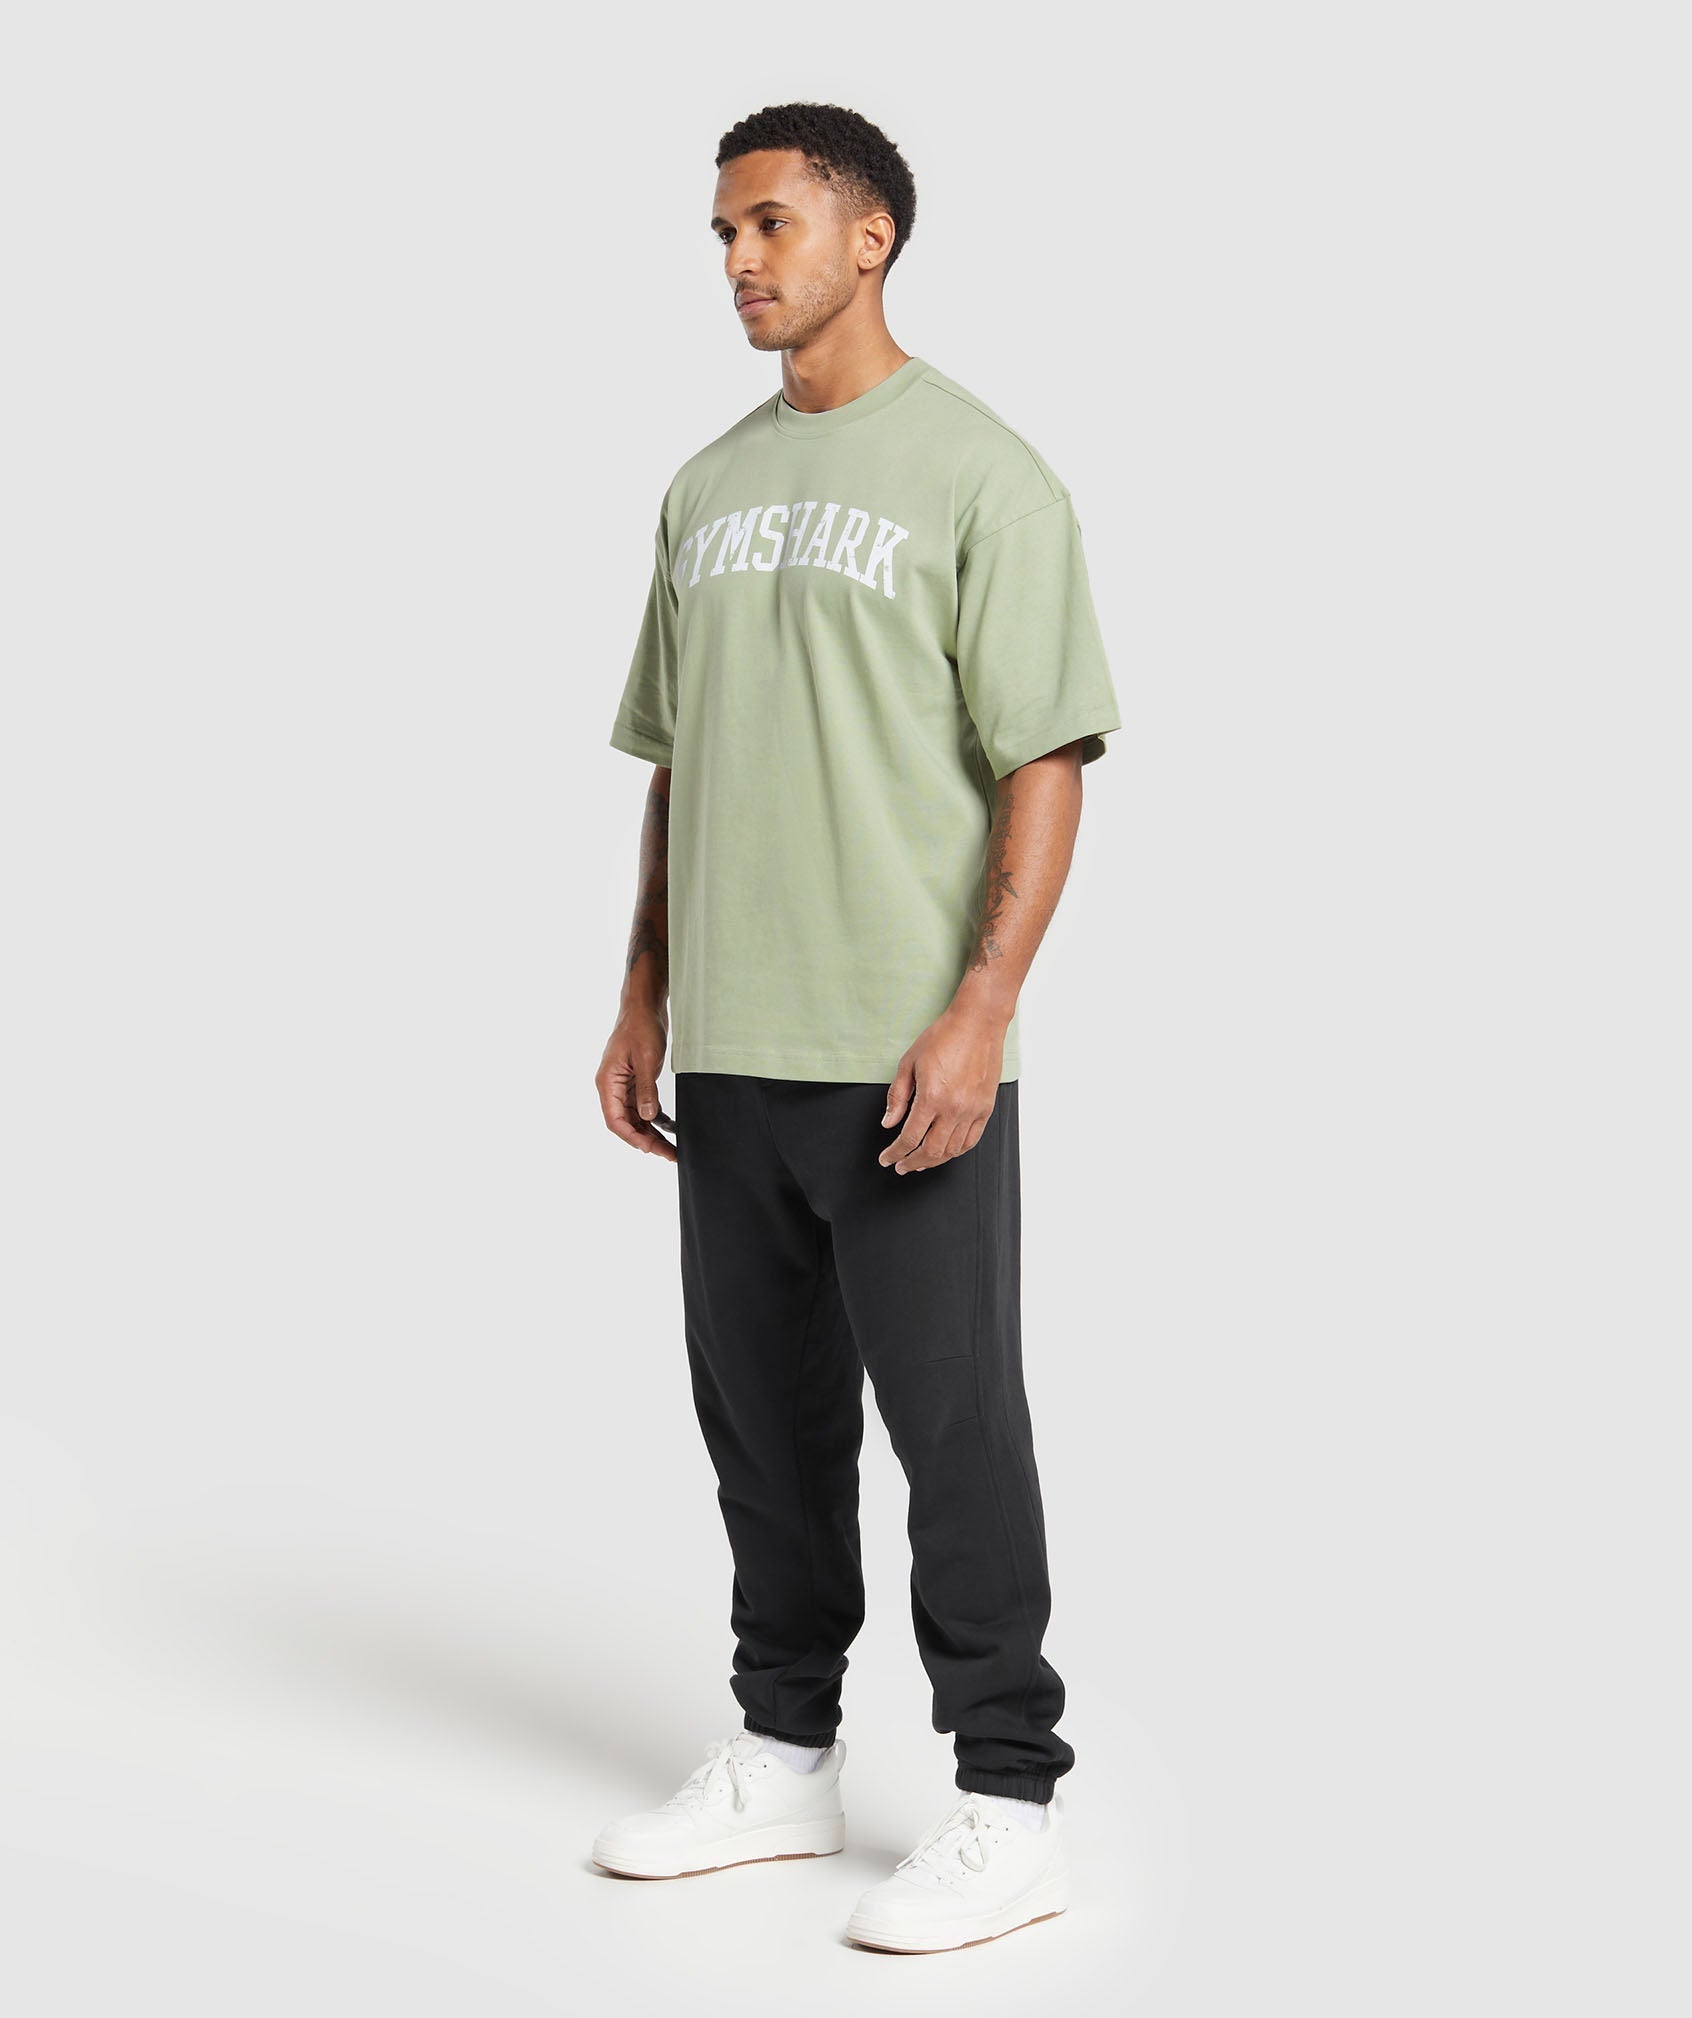 Collegiate T-Shirt in Faded Green - view 4